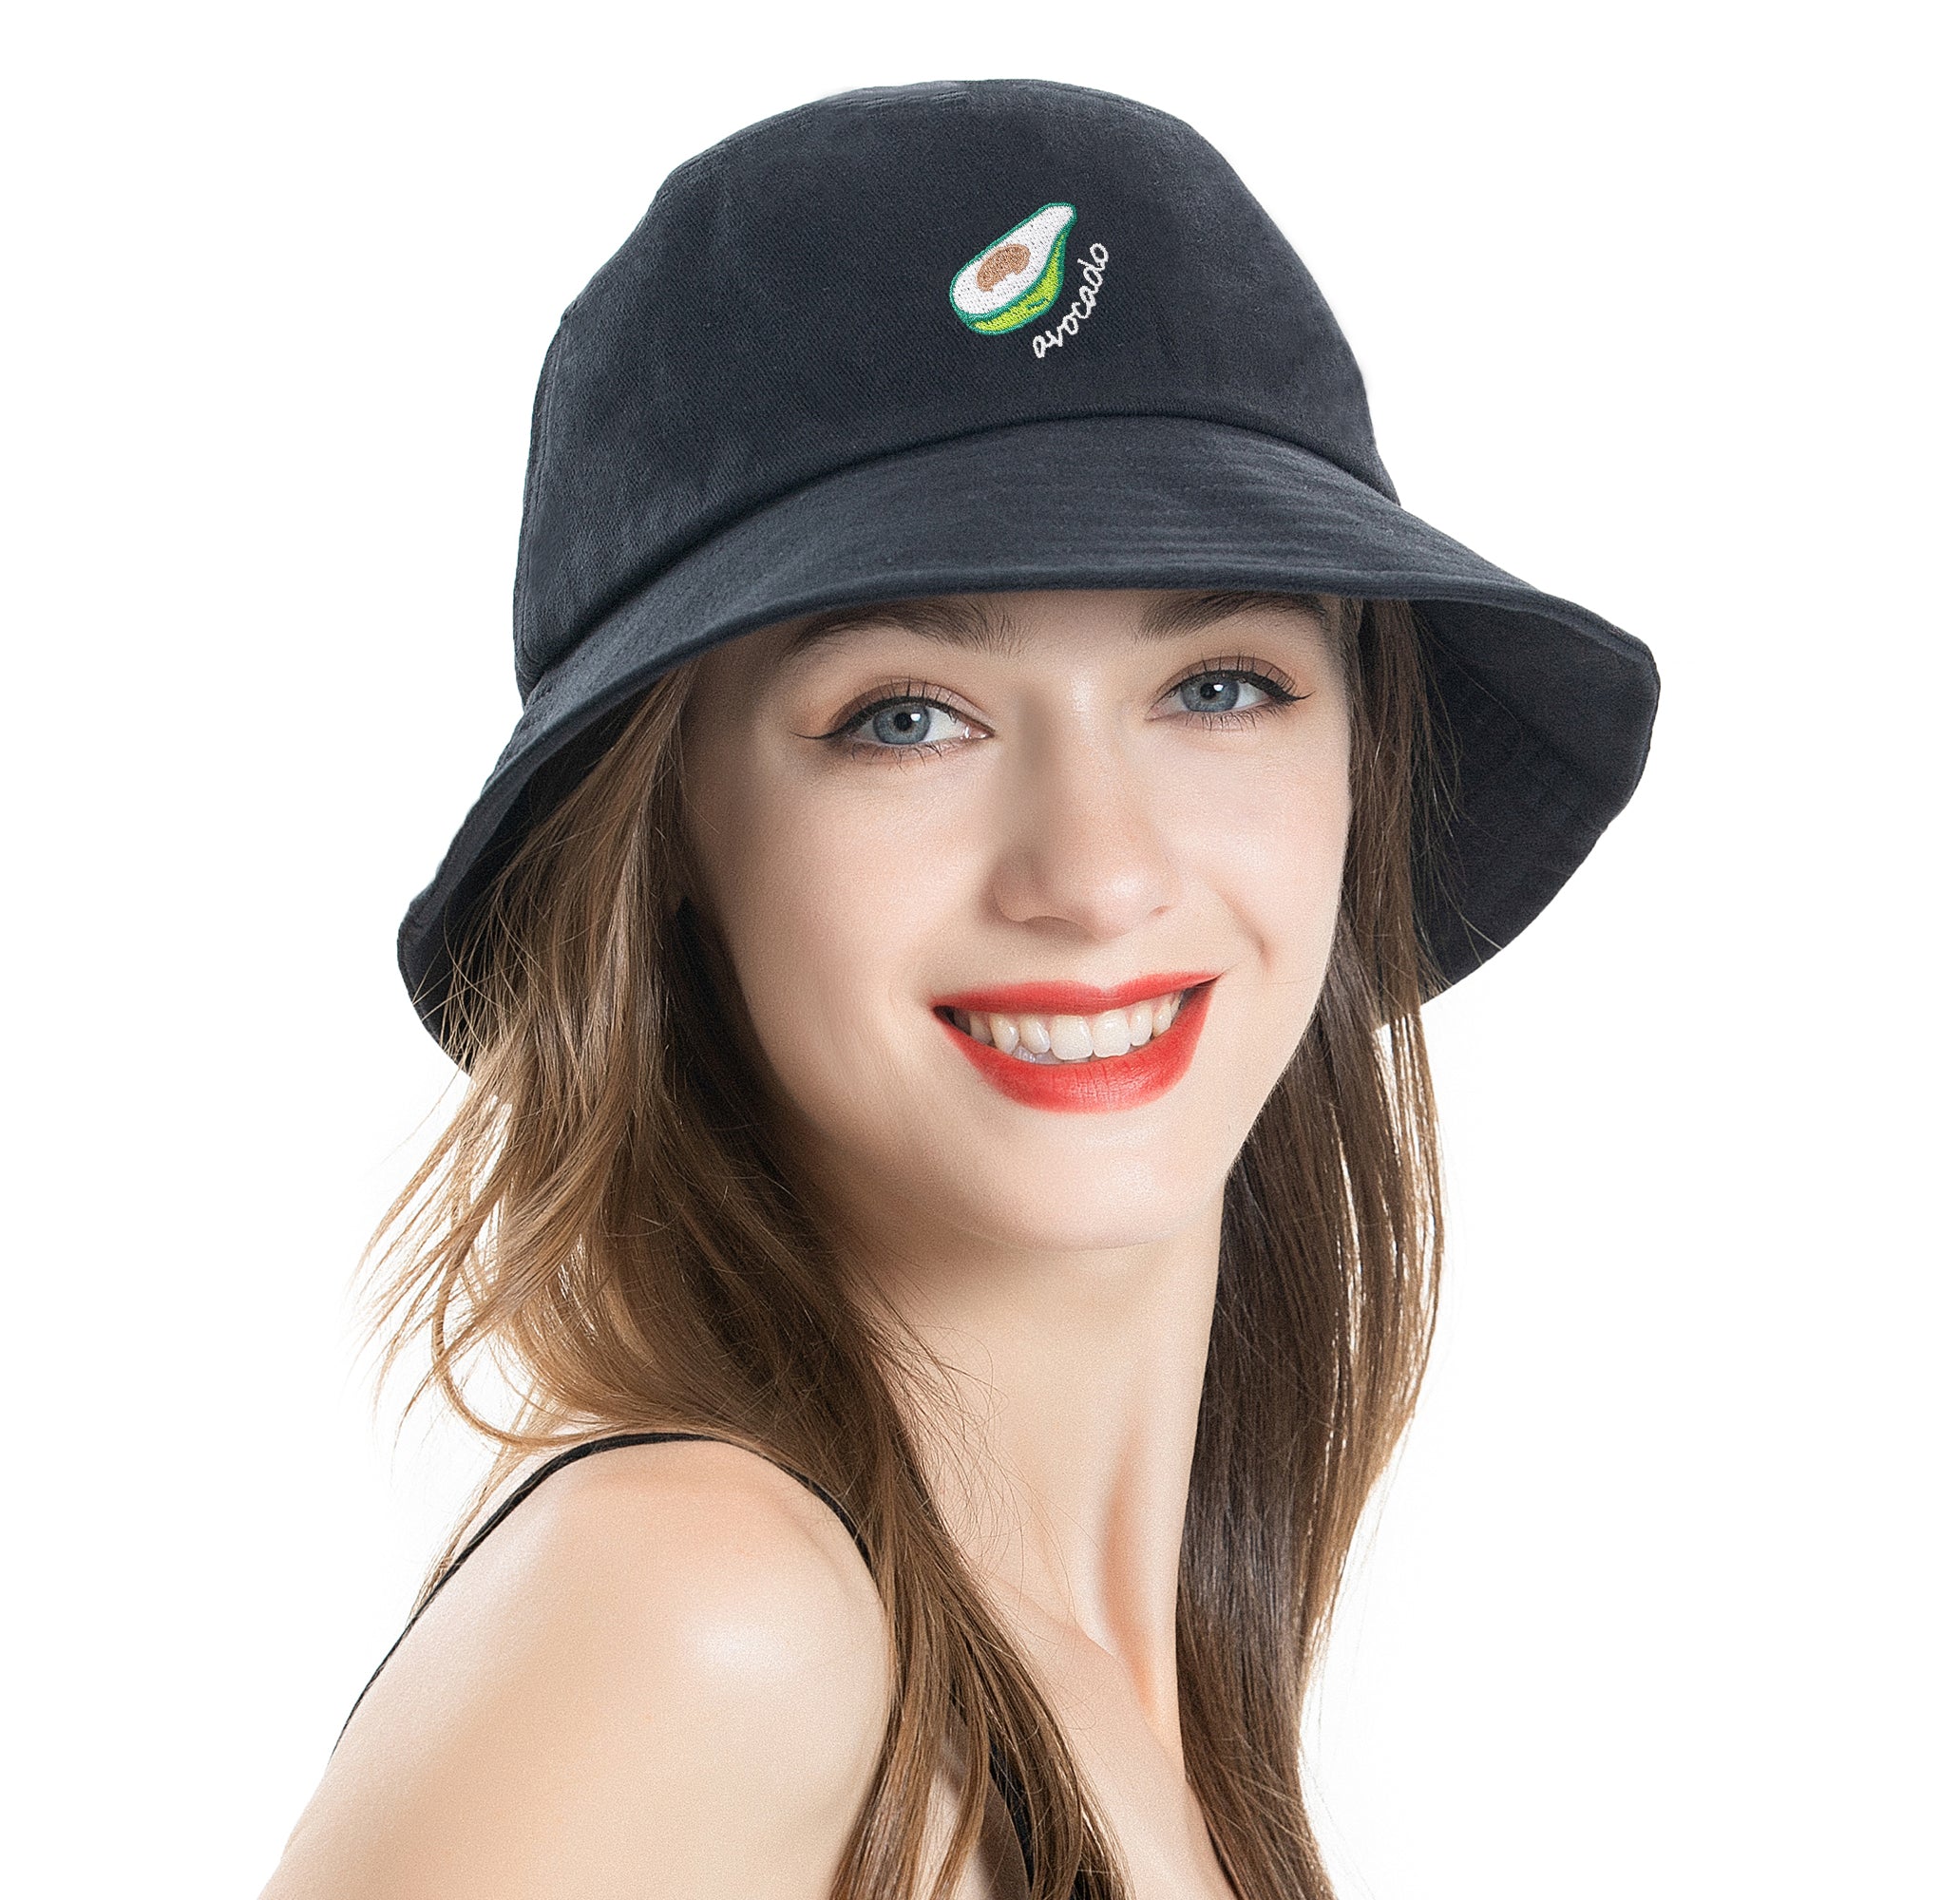 Embroidered Avocado Bucket Hat